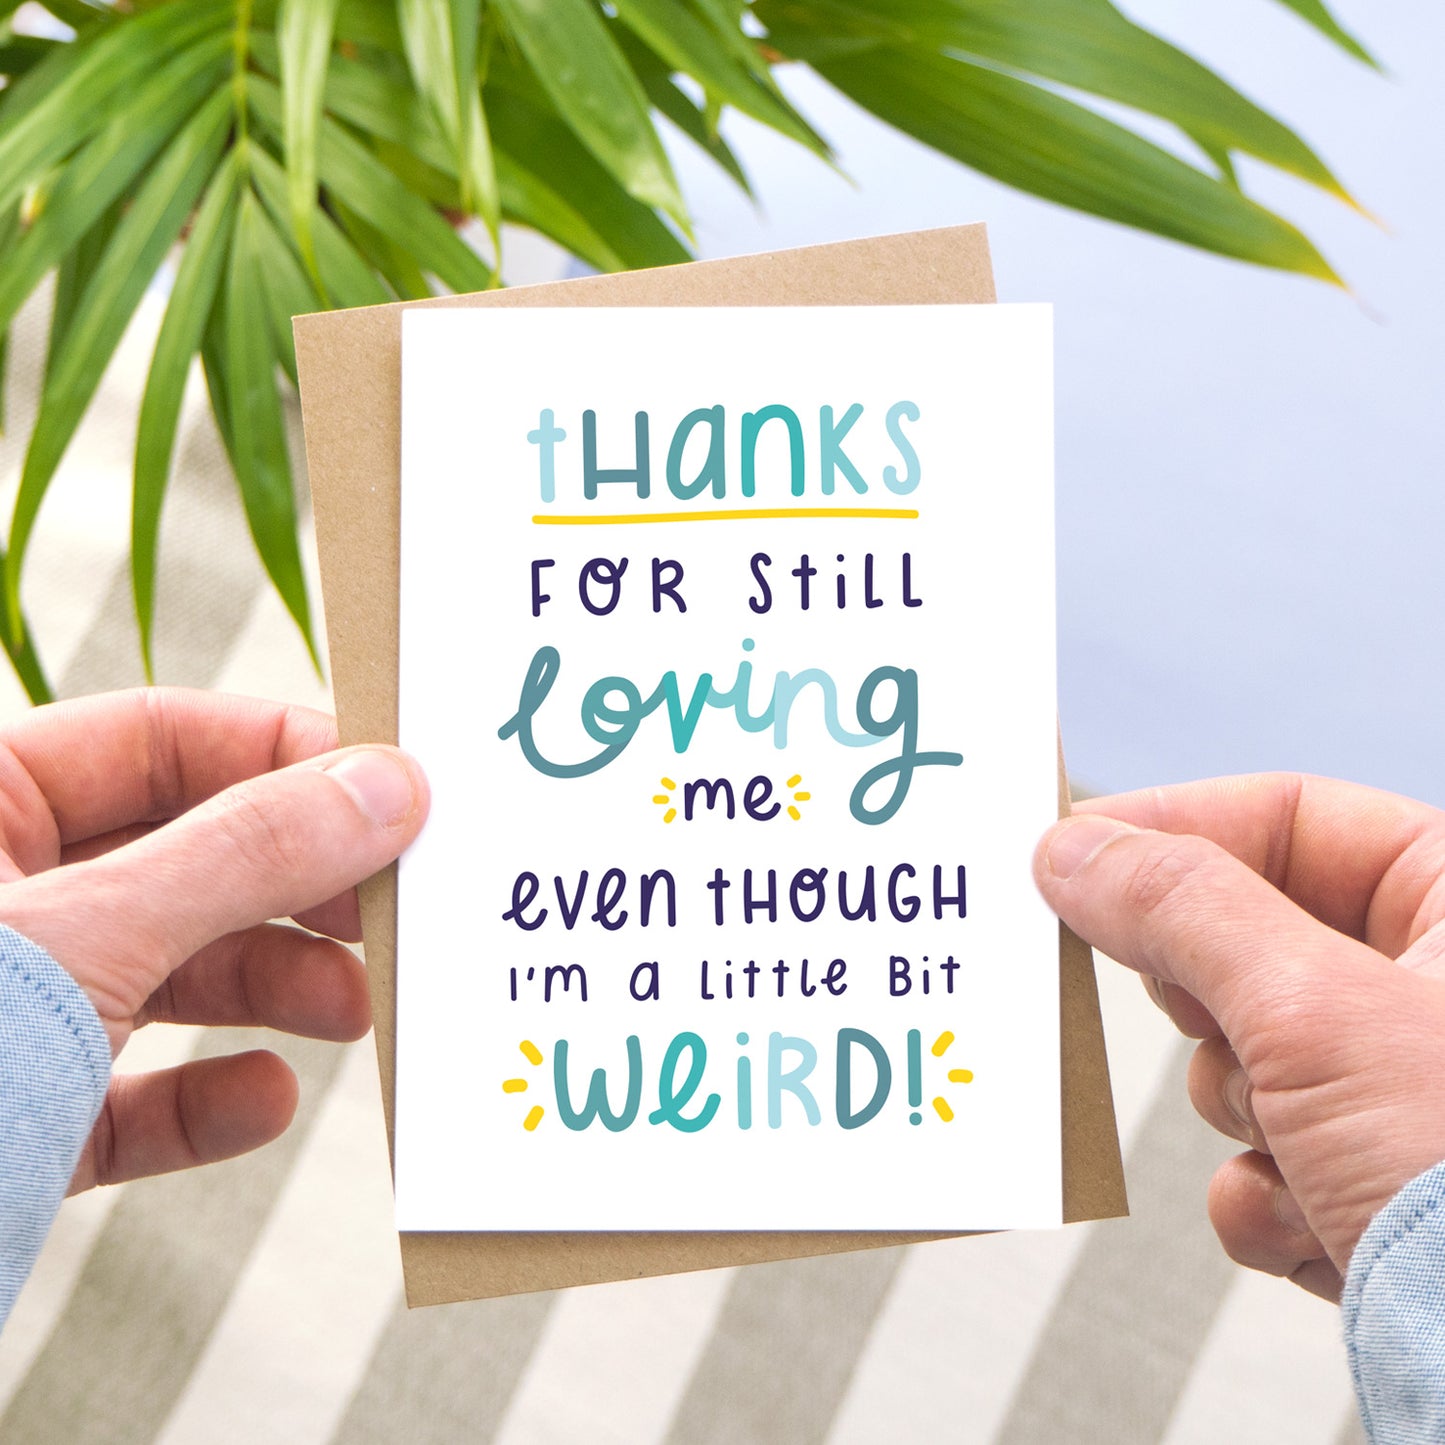 Thanks for still loving me even though I'm a little bit weird card in blue being held over a blue background with a leafy plant.